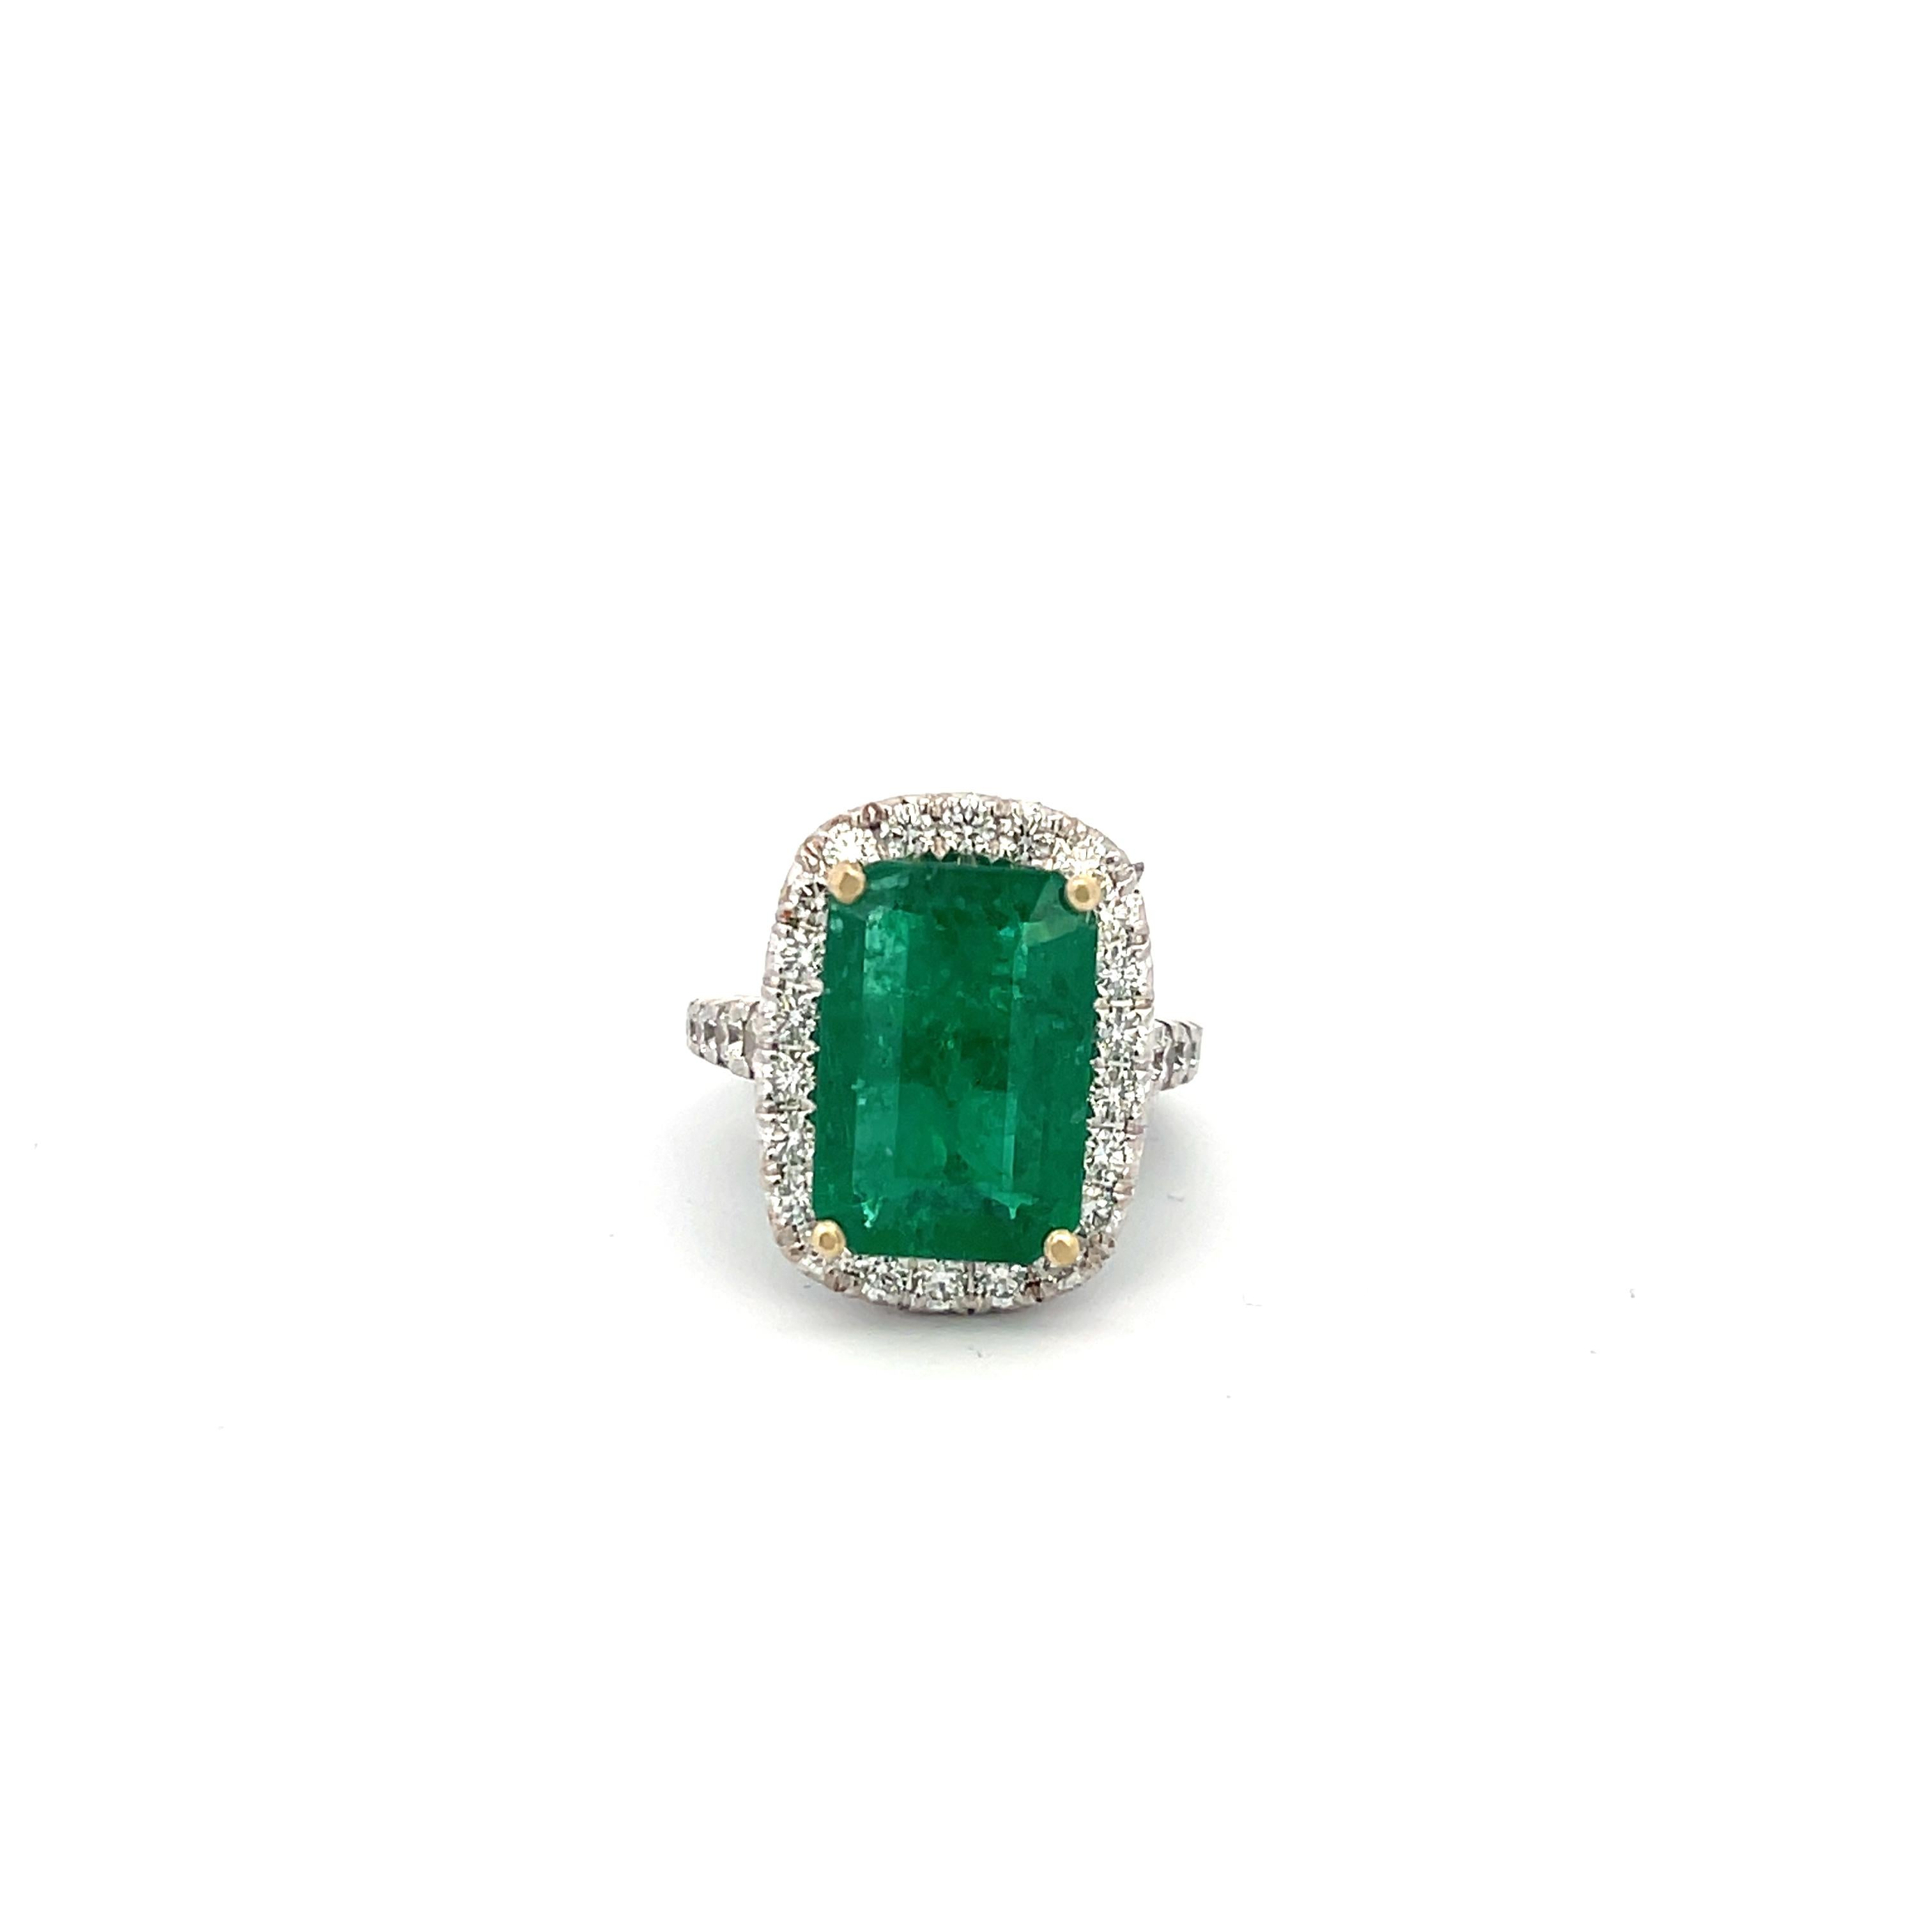 Emerald and Diamond Ring in 18k White Gold. The ring features an emerald cut emerald that is 5.32ct , accented by brilliant round cut diamonds.  Size 5.75

7.6 Grams